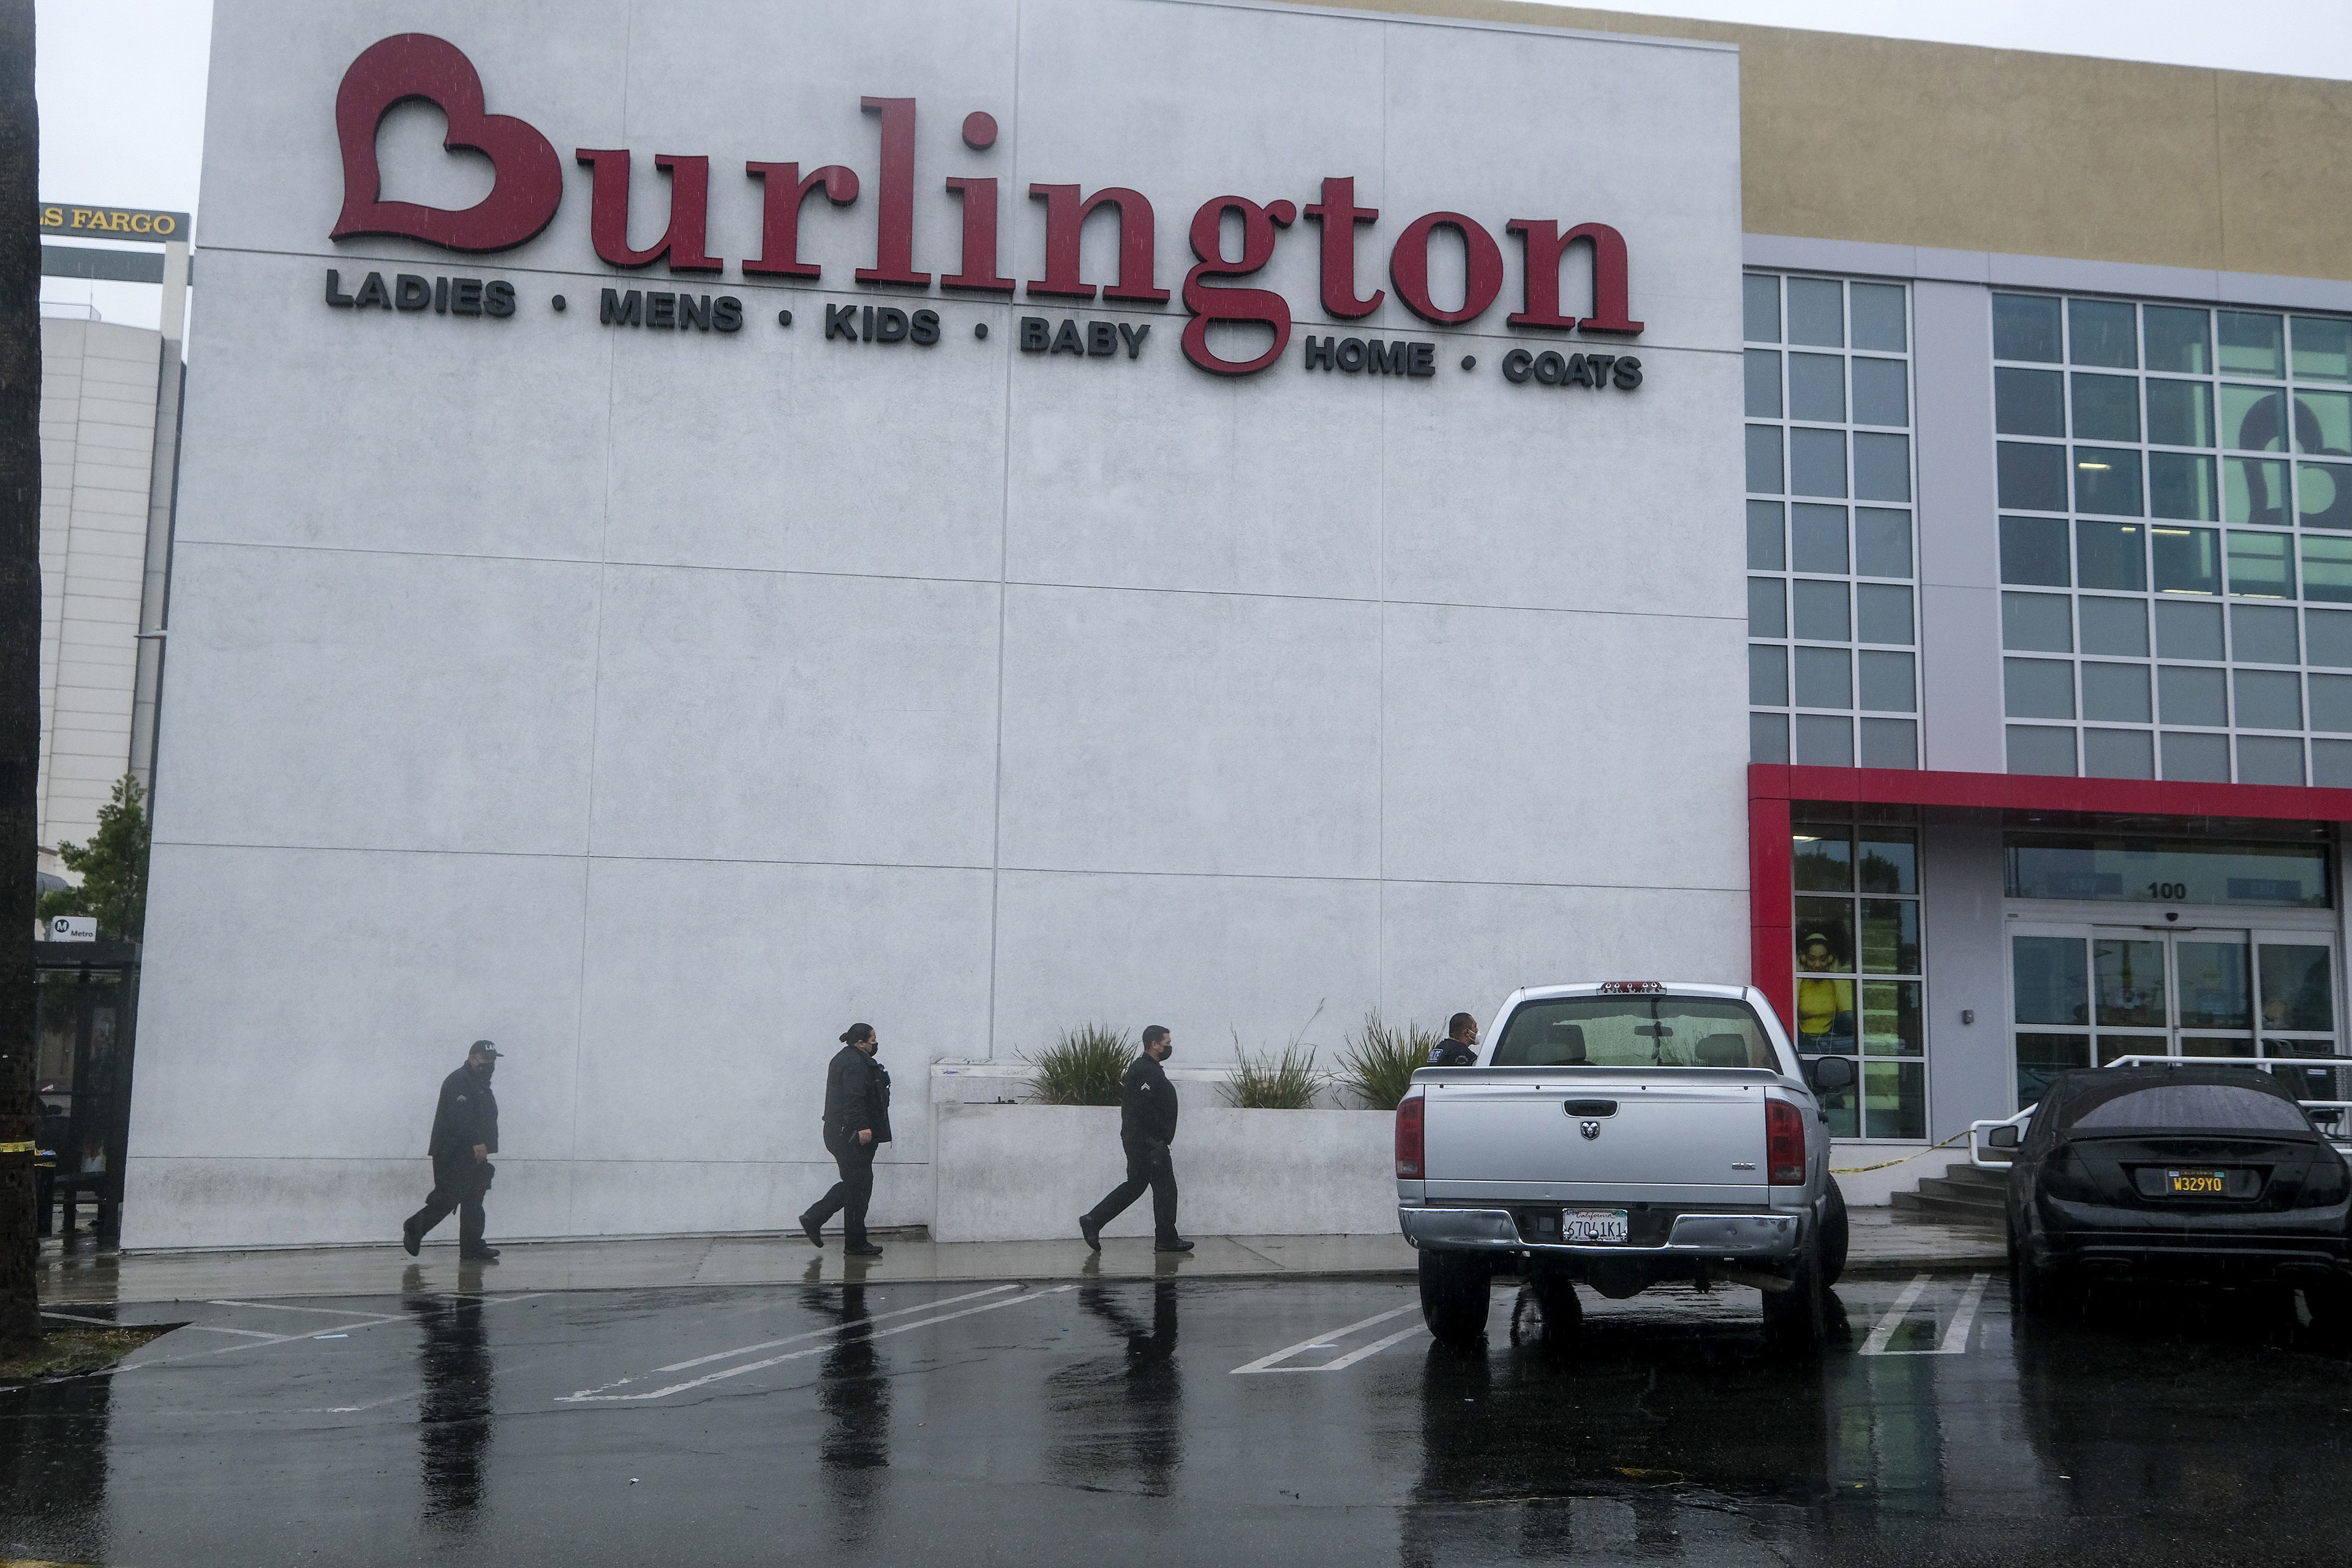 Burlington announces Friday store openings in Brick, Howell